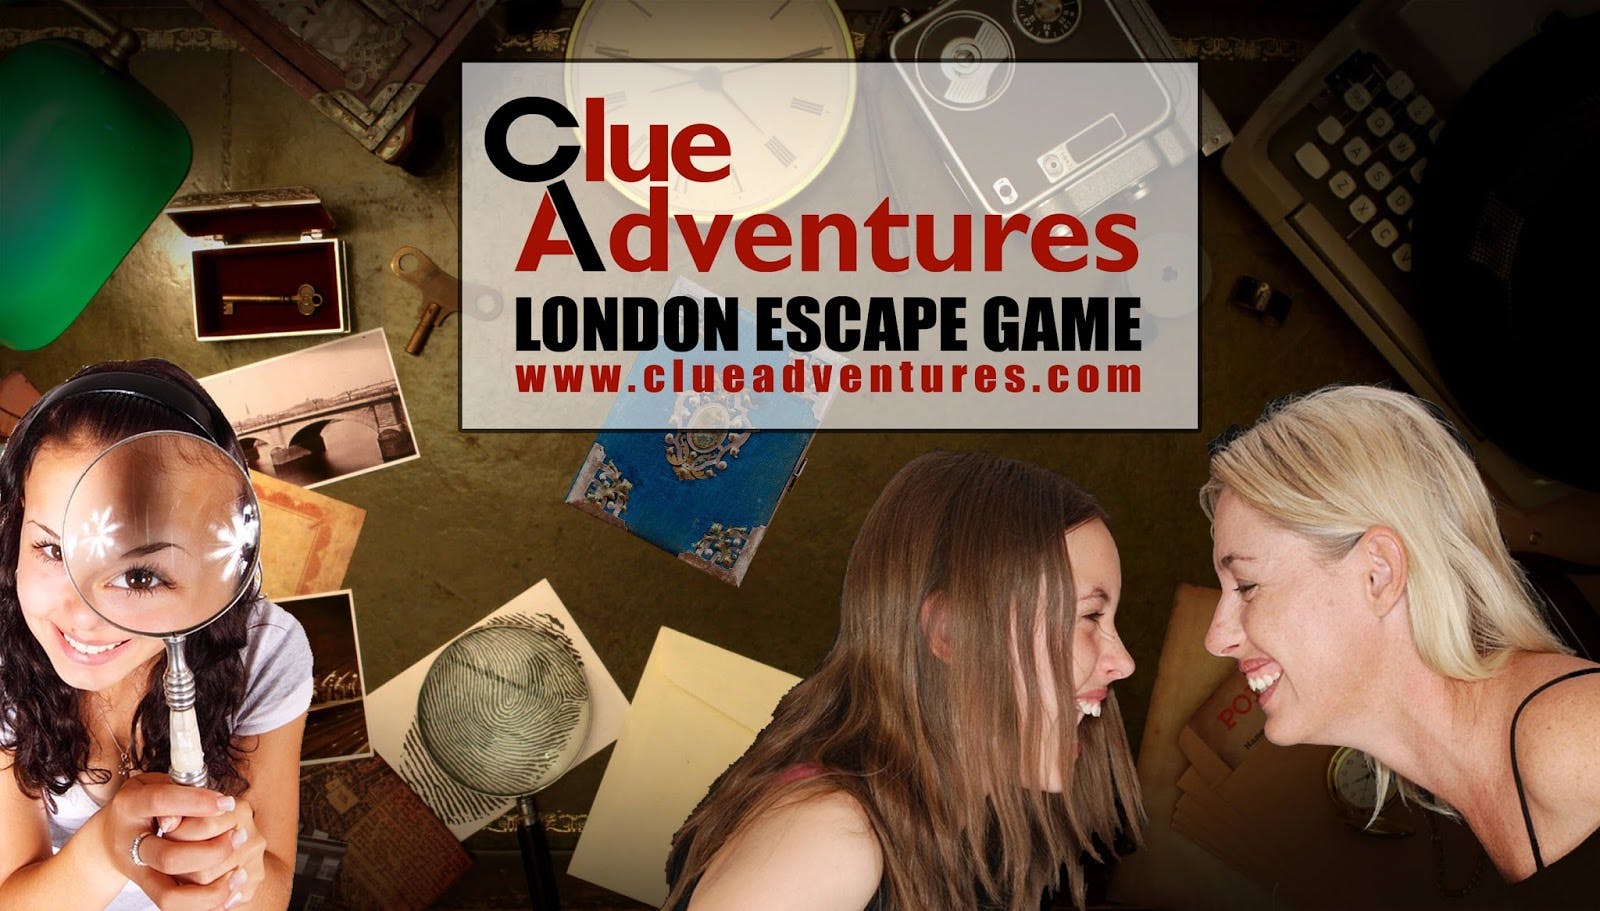 Image - Clue Adventures - London Escape Room Game / Live Escaping for 2,3,4,5,6 or 7 Players